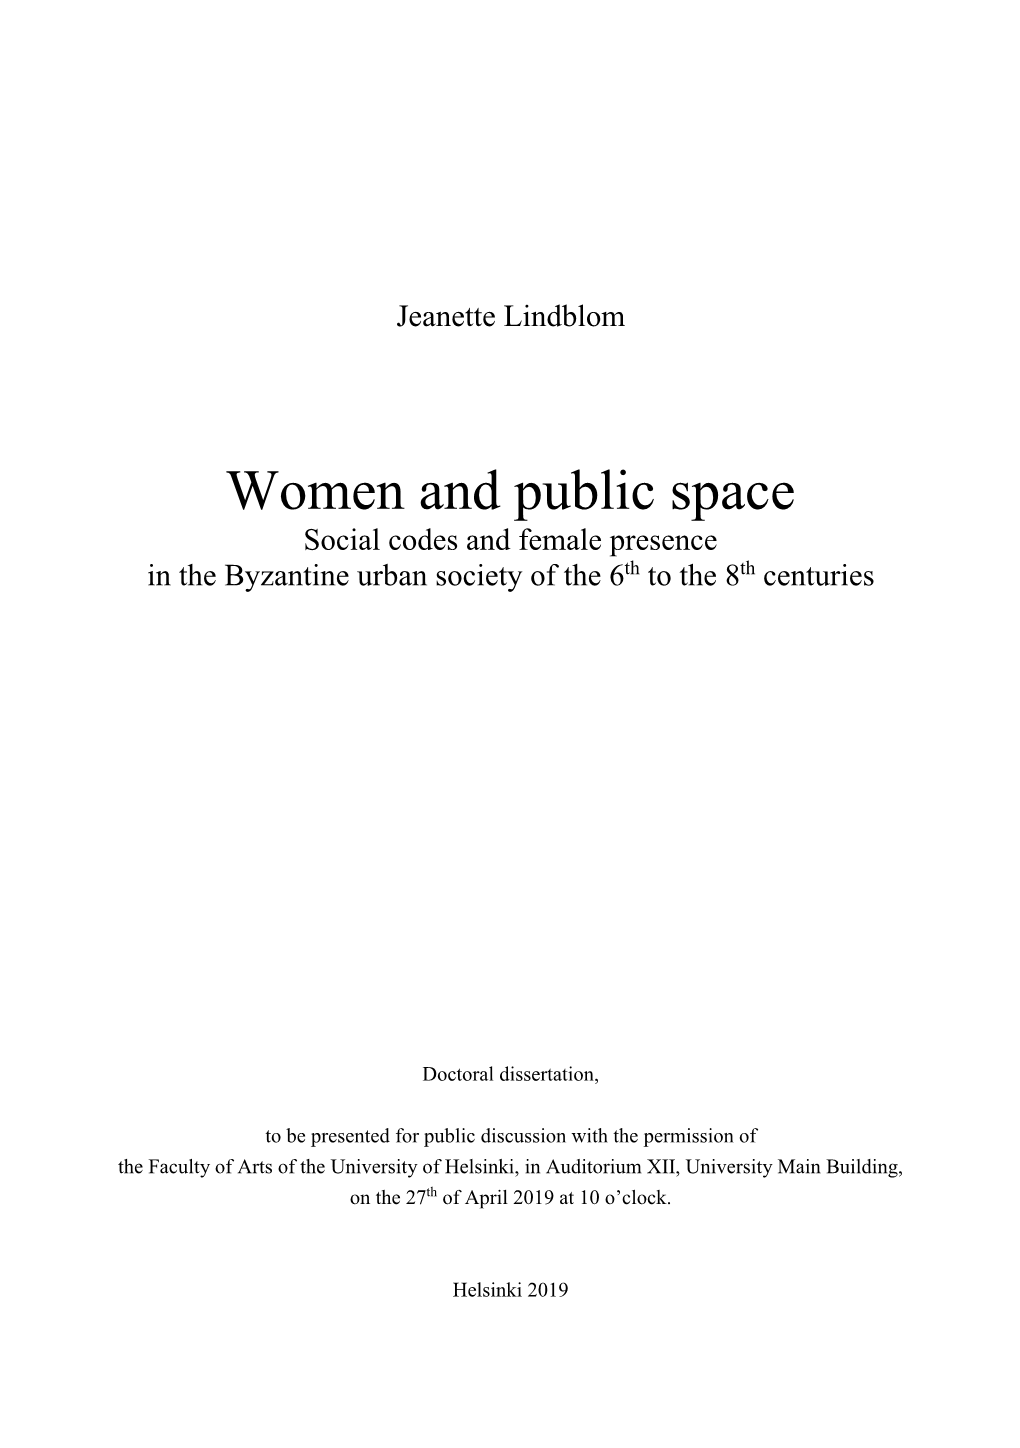 Women and Public Space: Social Codes and Female Presence in The